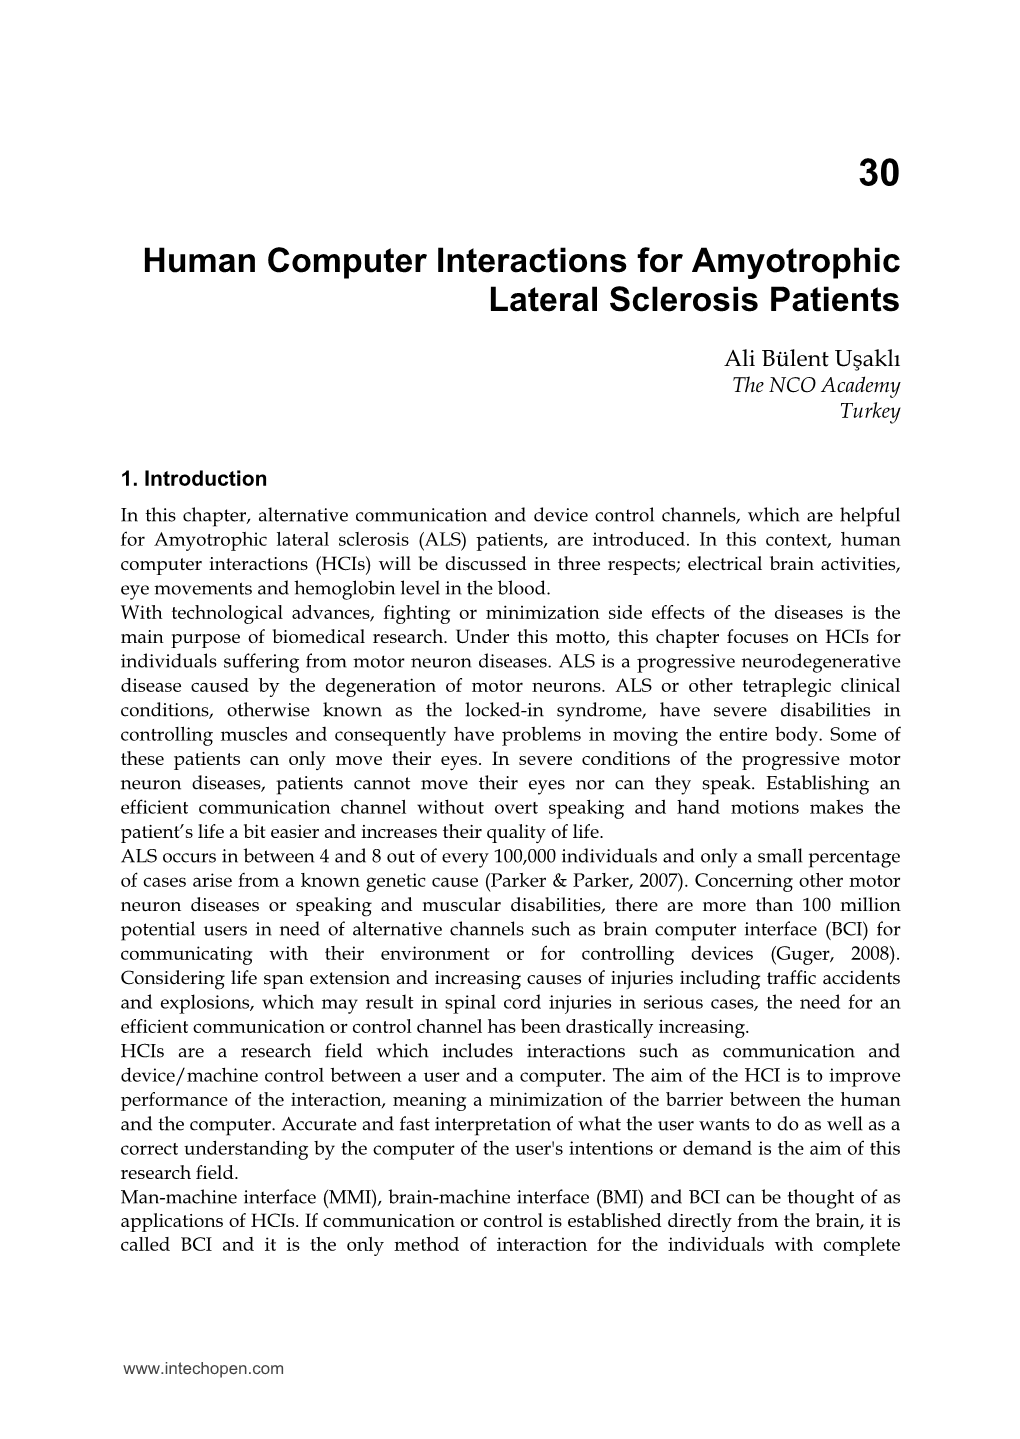 Human Computer Interactions for Amyotrophic Lateral Sclerosis Patients